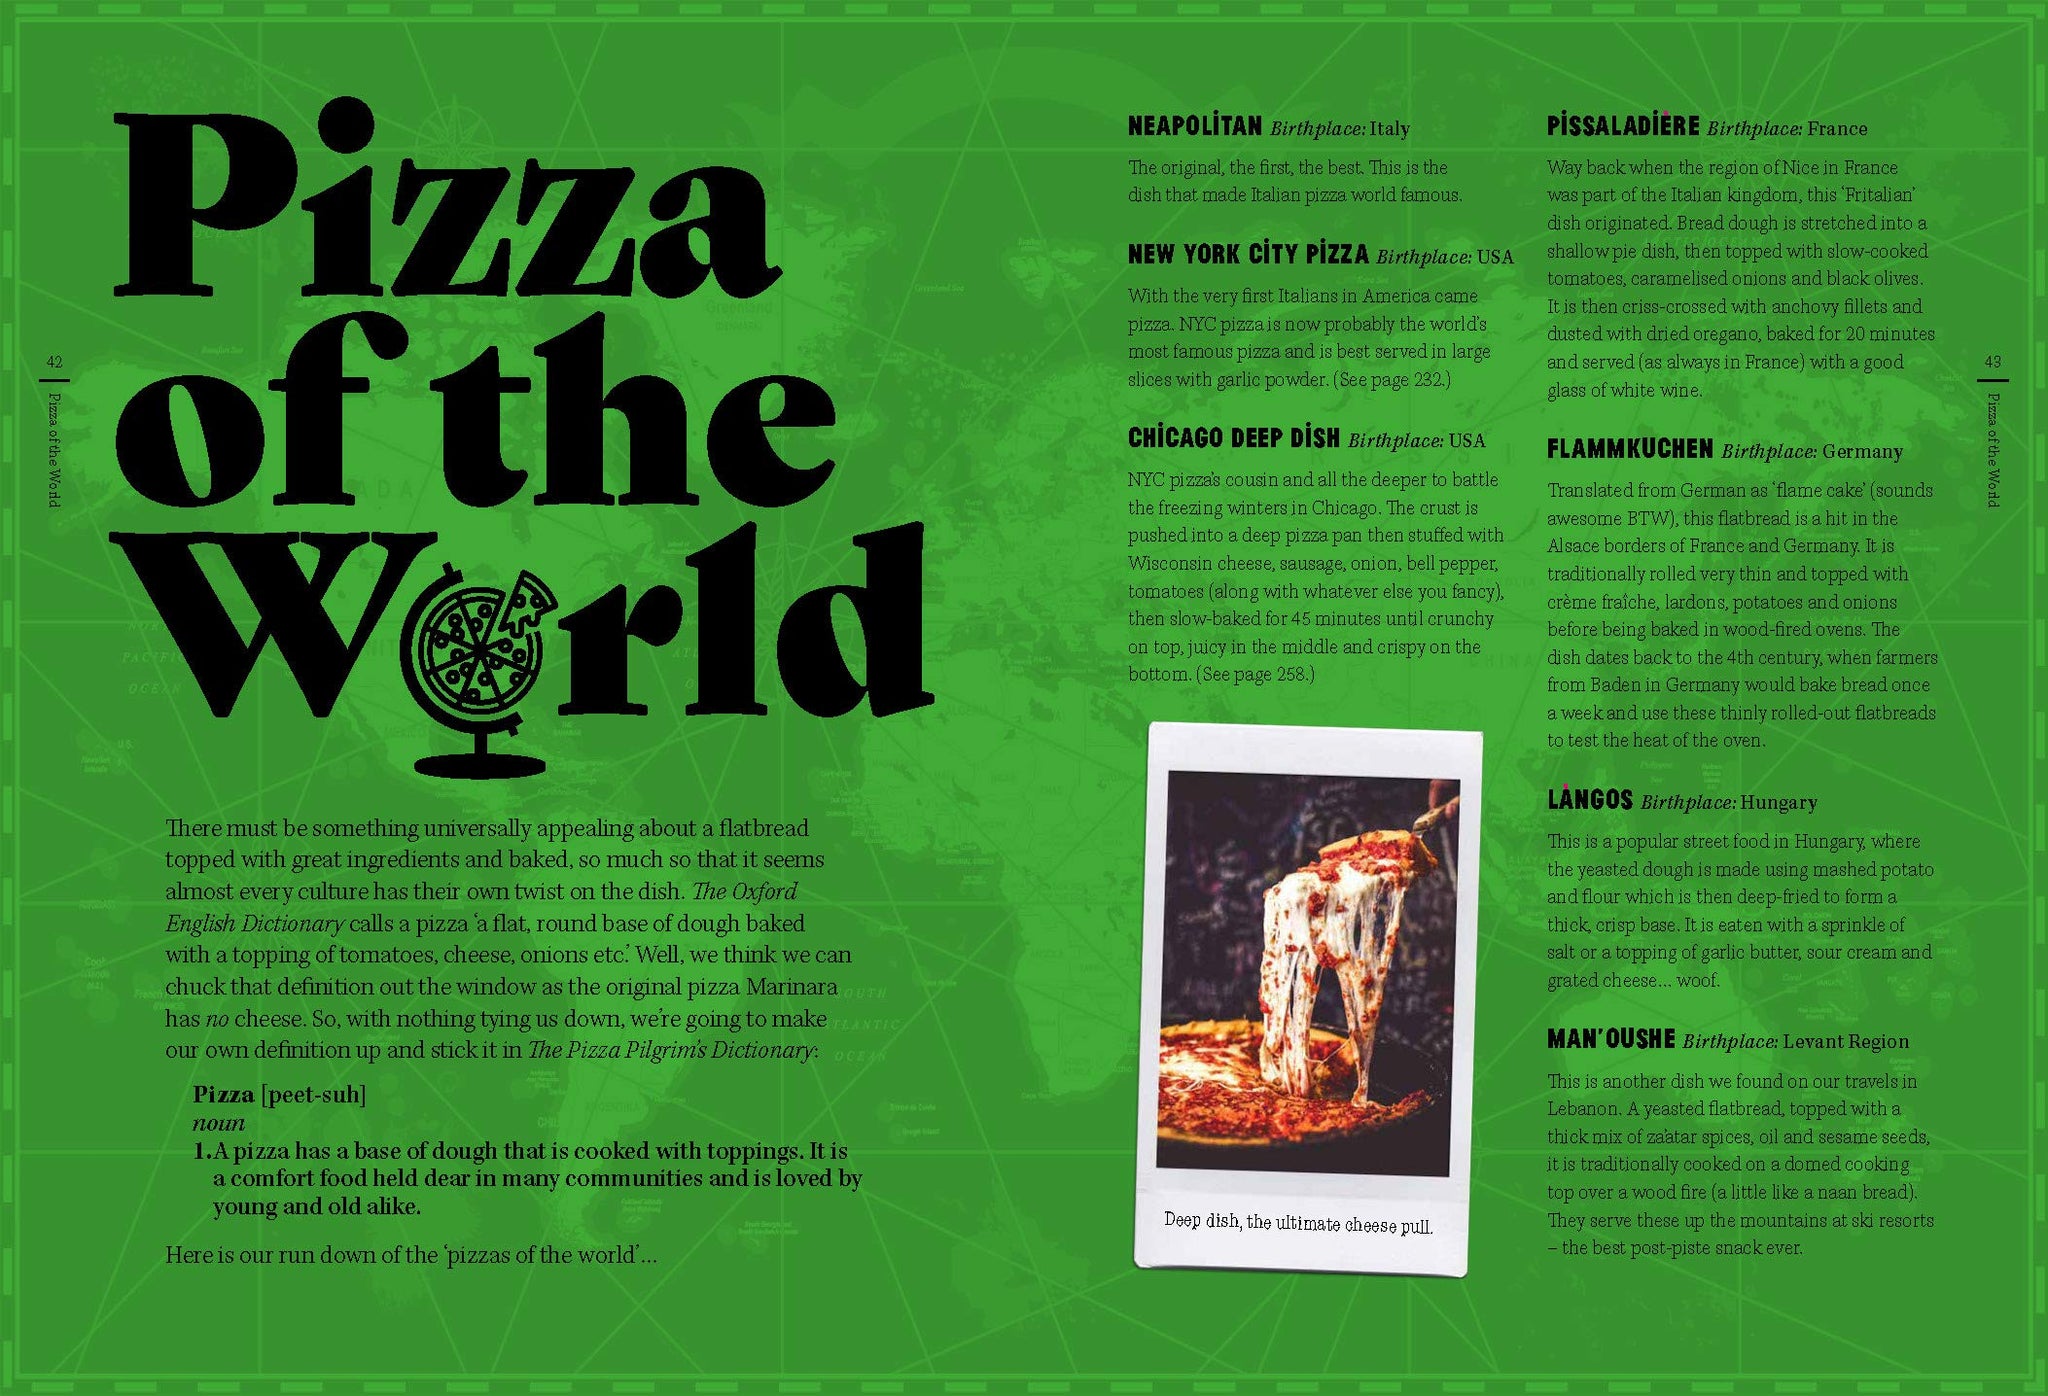 Book - Pizza; History, Recipes, Stories, People, Places, Love